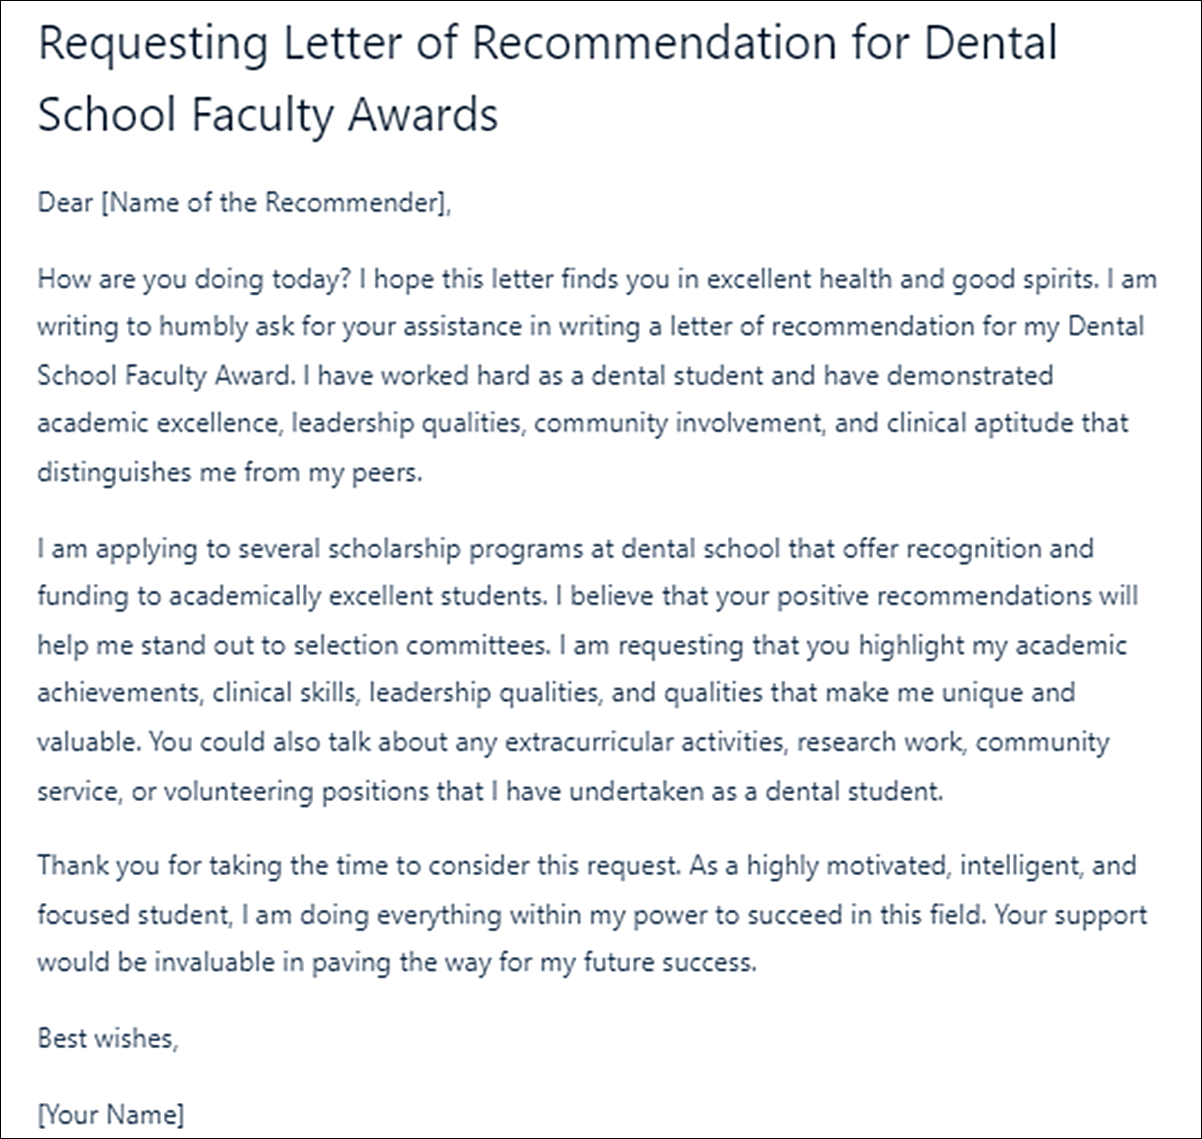 How to Request a Letter of Recommendation Template for Dental School